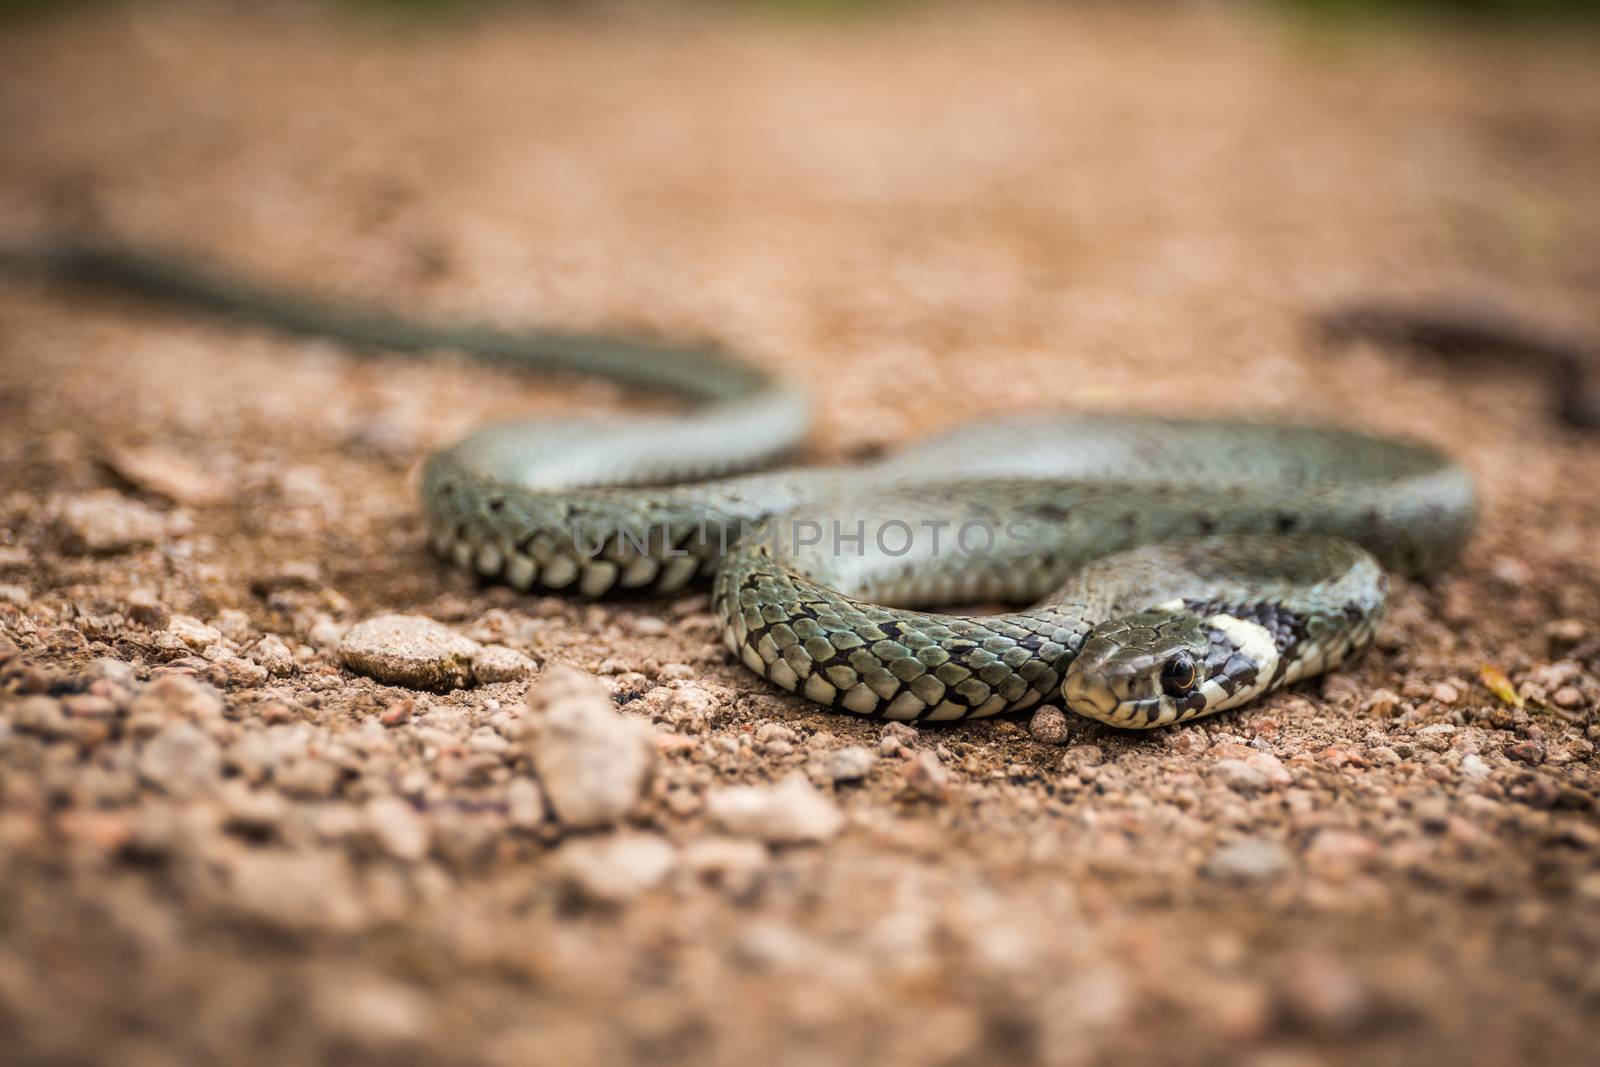 Masculine reptile or grass snake